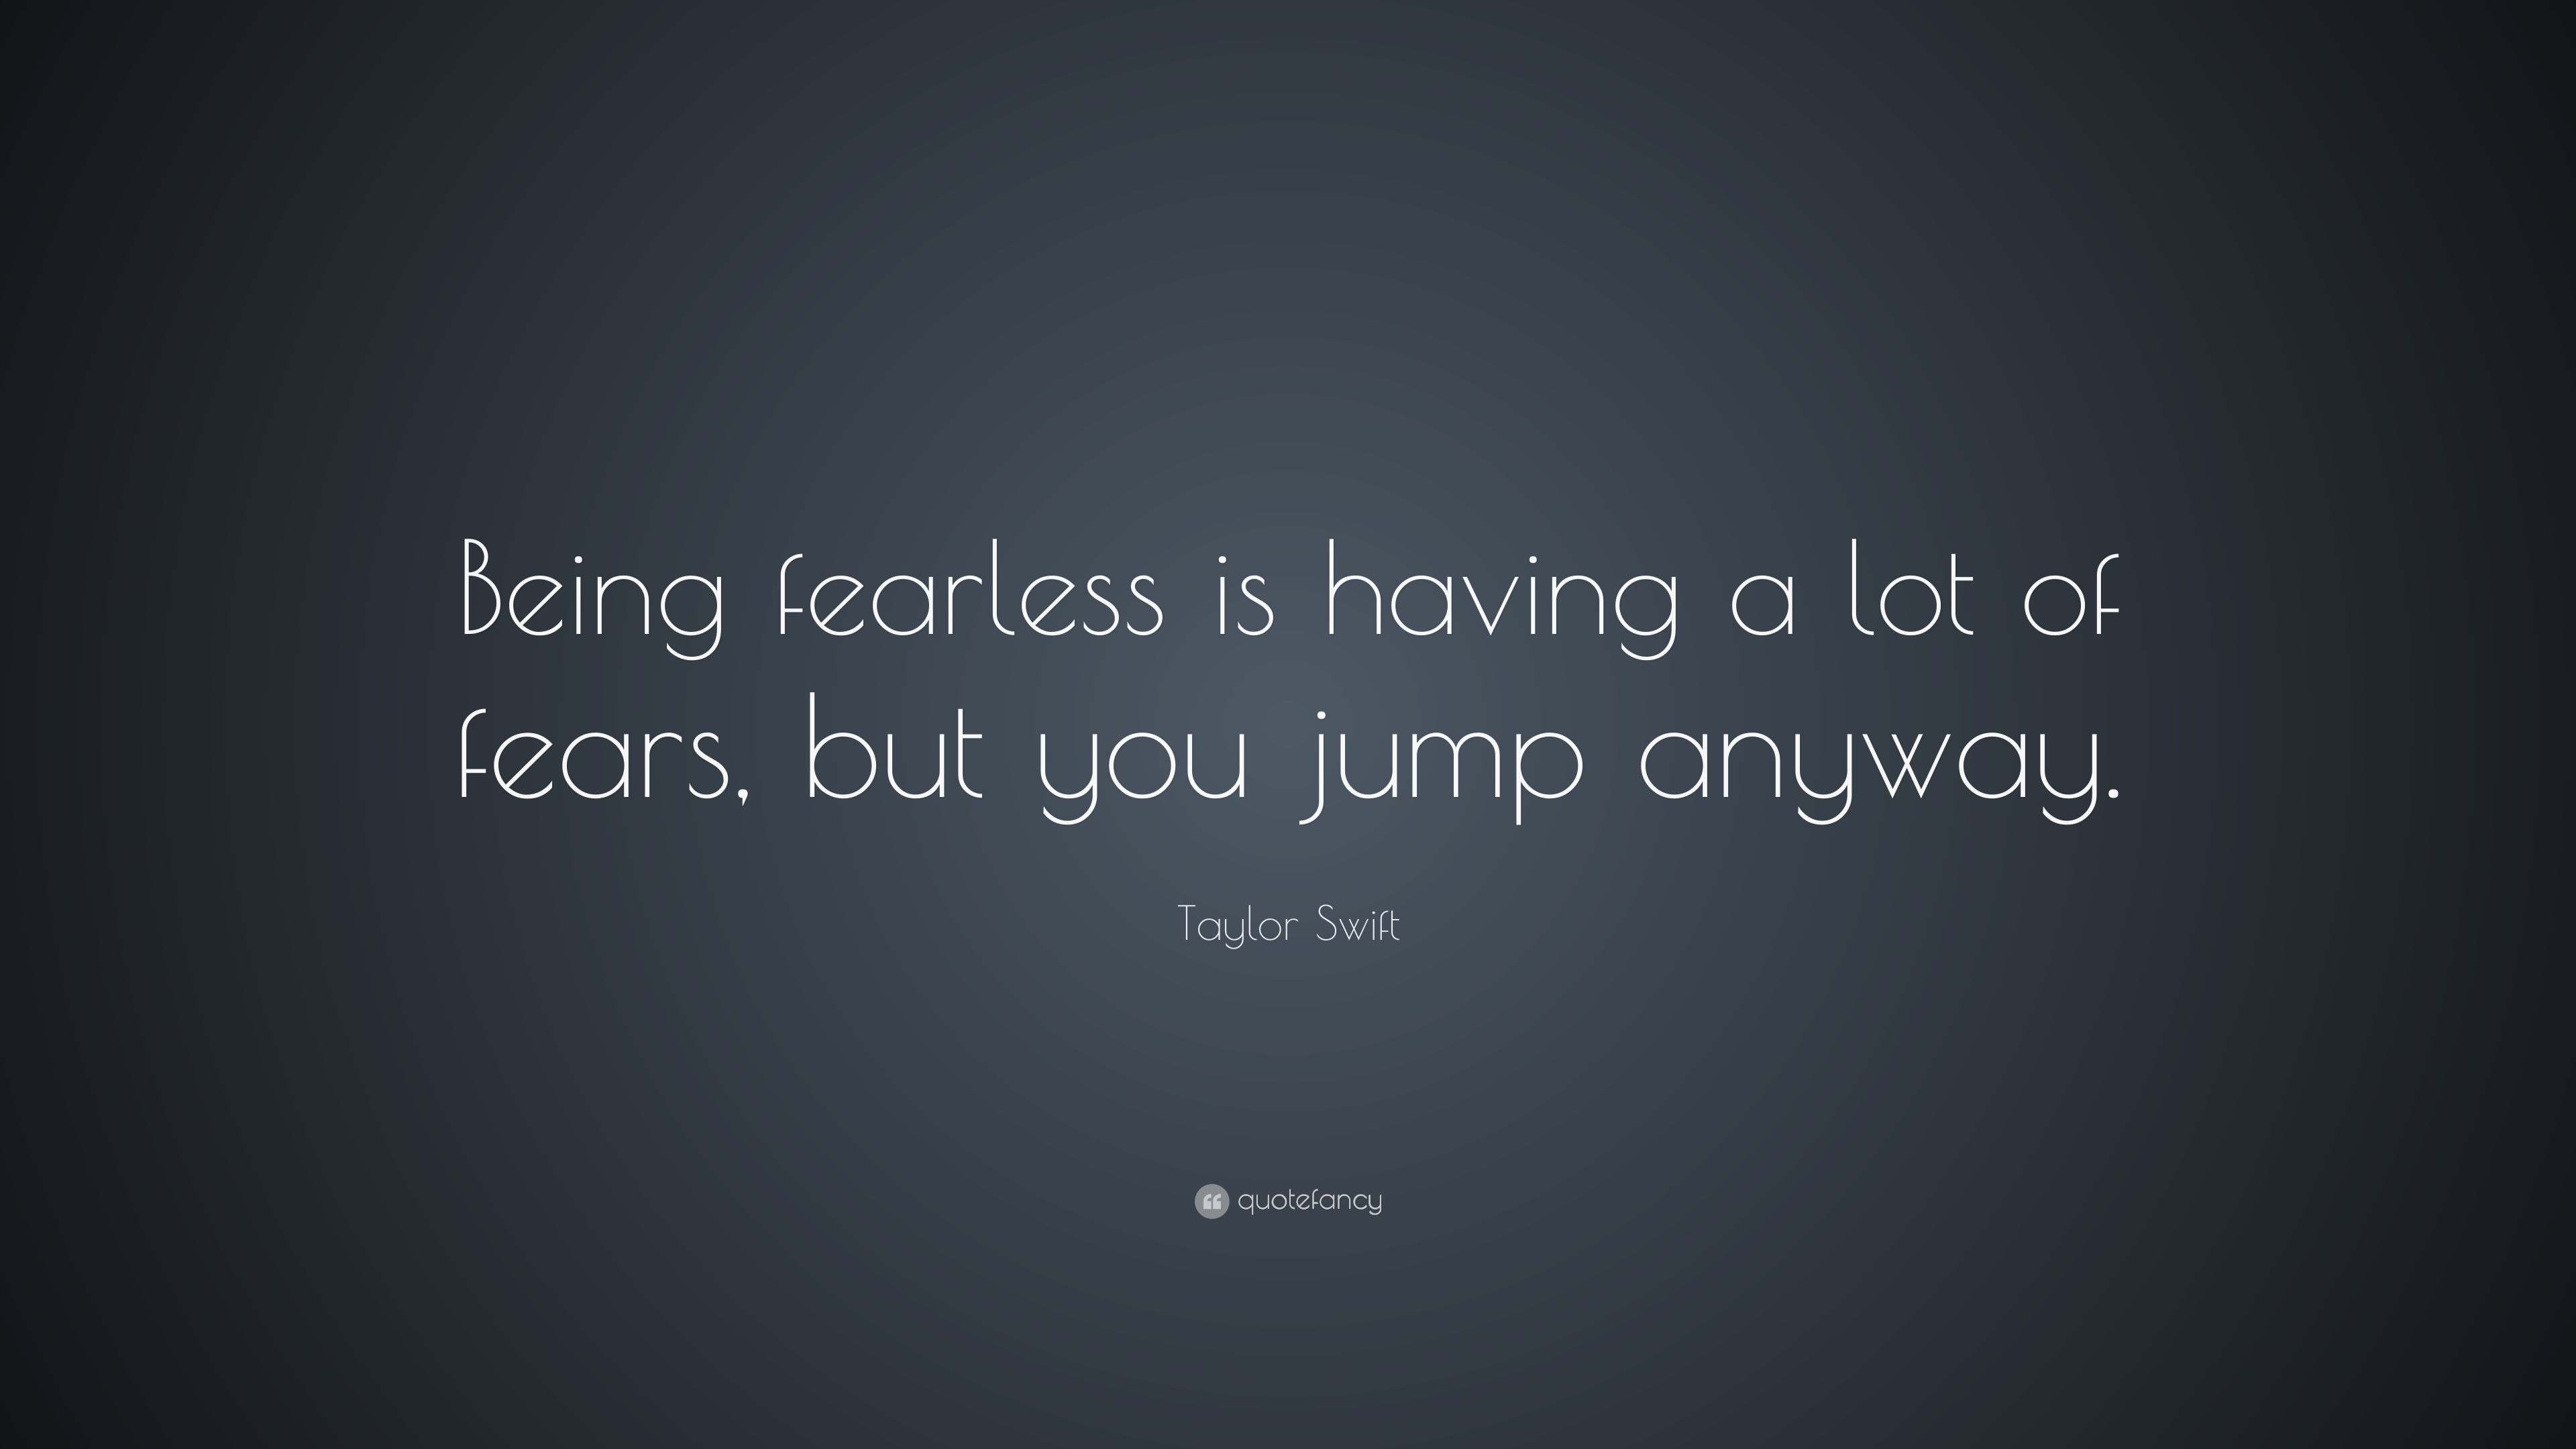 Being fearless is having a lot of fears, but you jump anyway. Taylor Swift